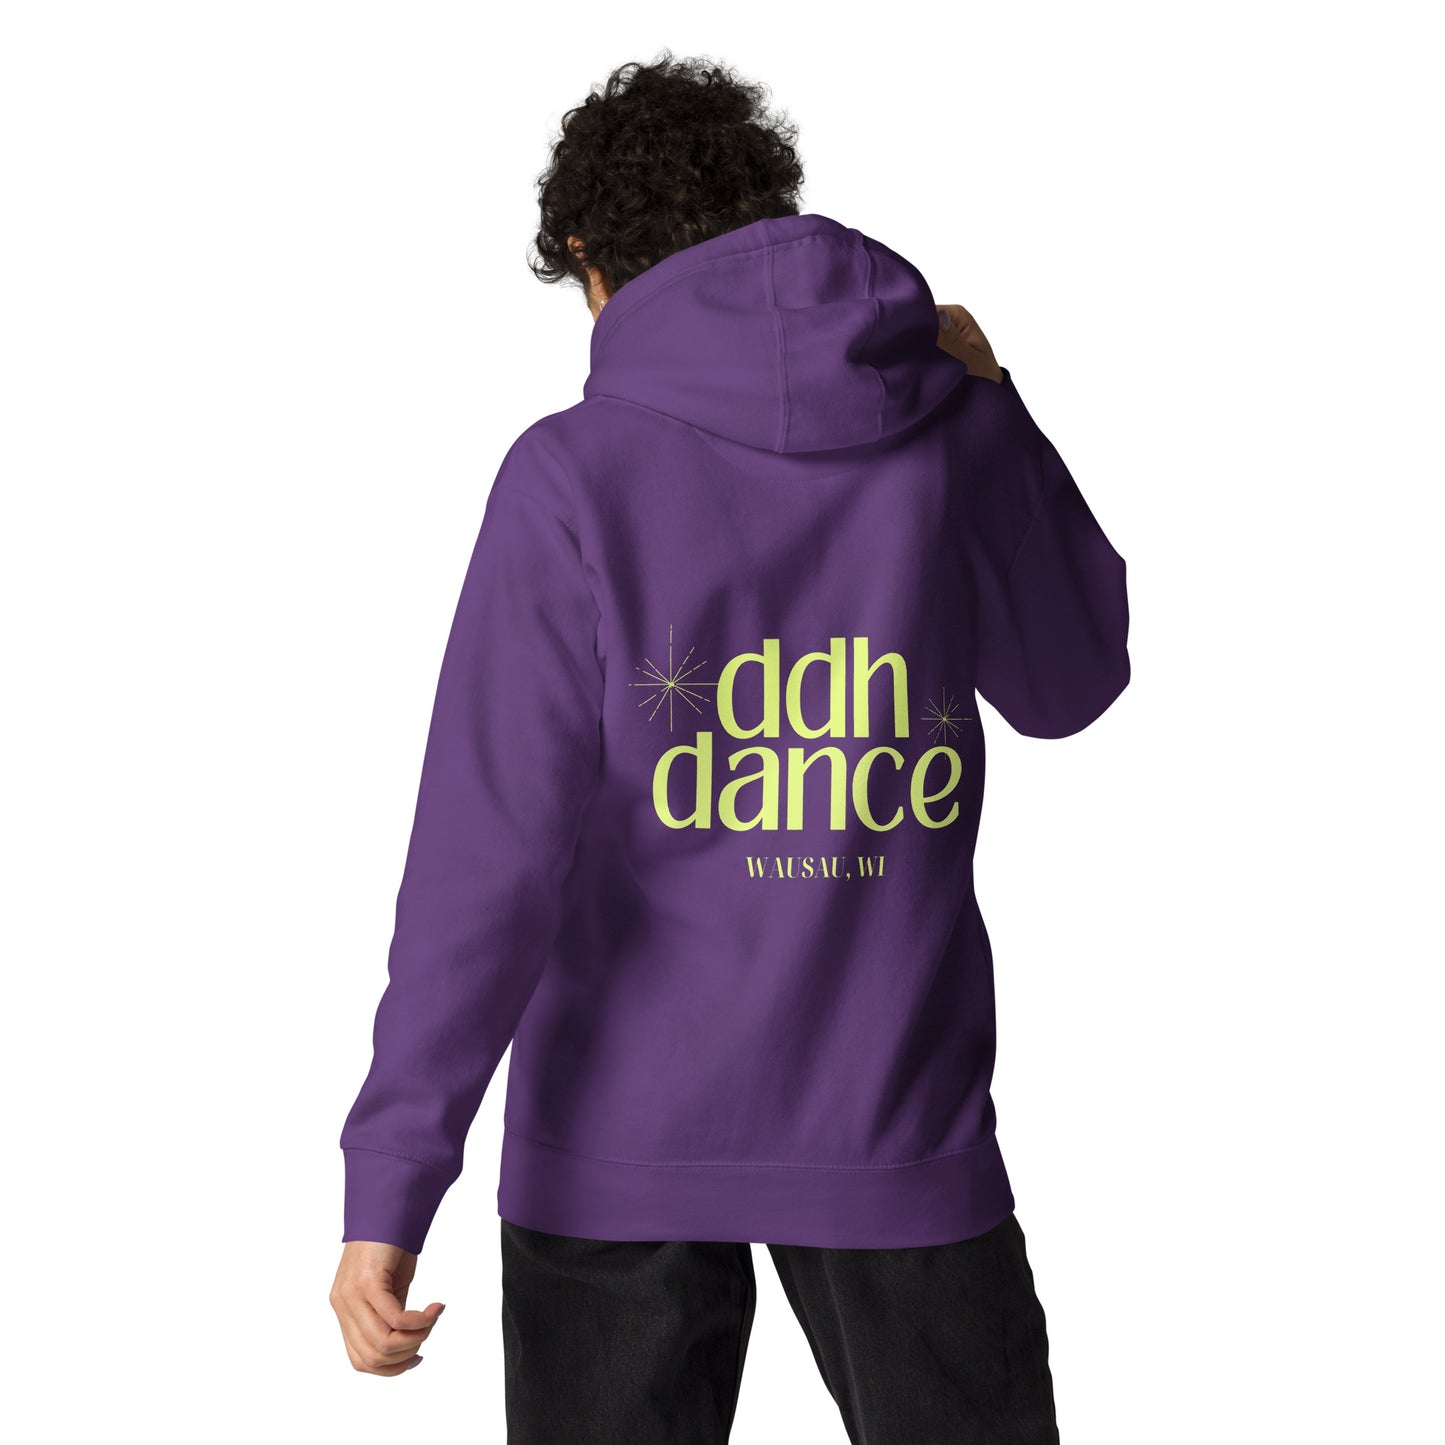 DDH Embroidered Logo Hoodie with Circle Design Back